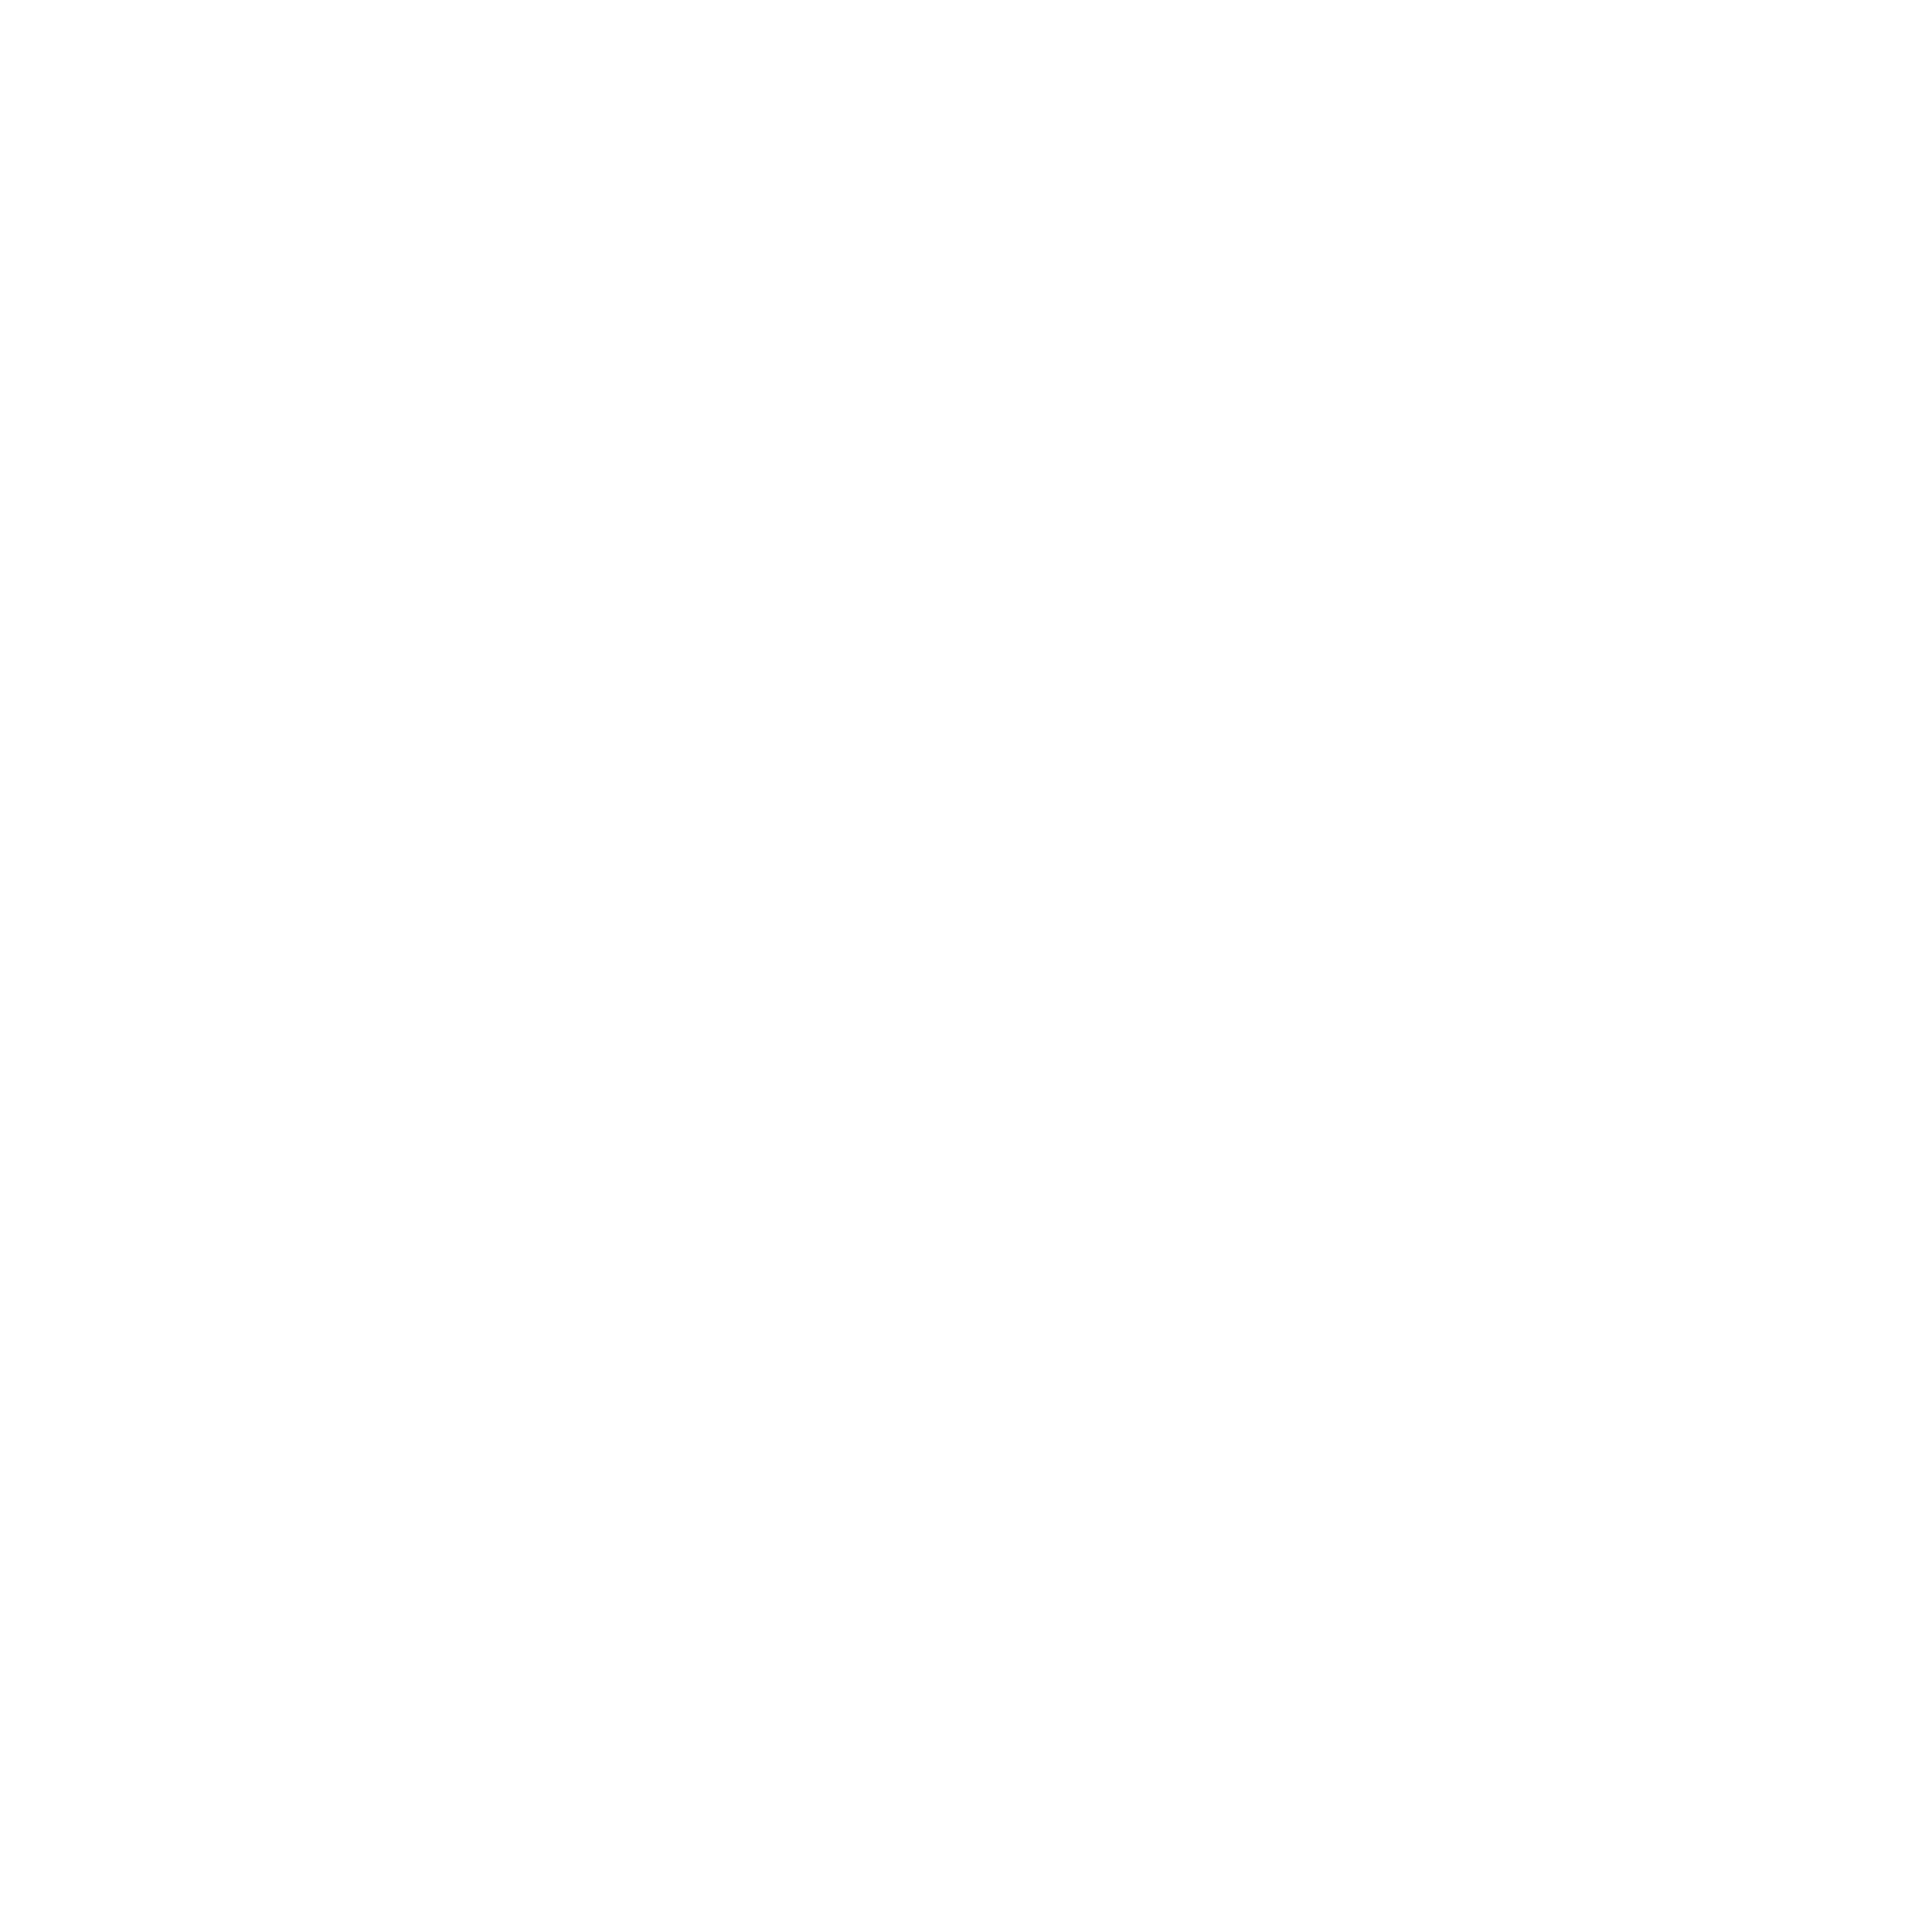 bend and stretch